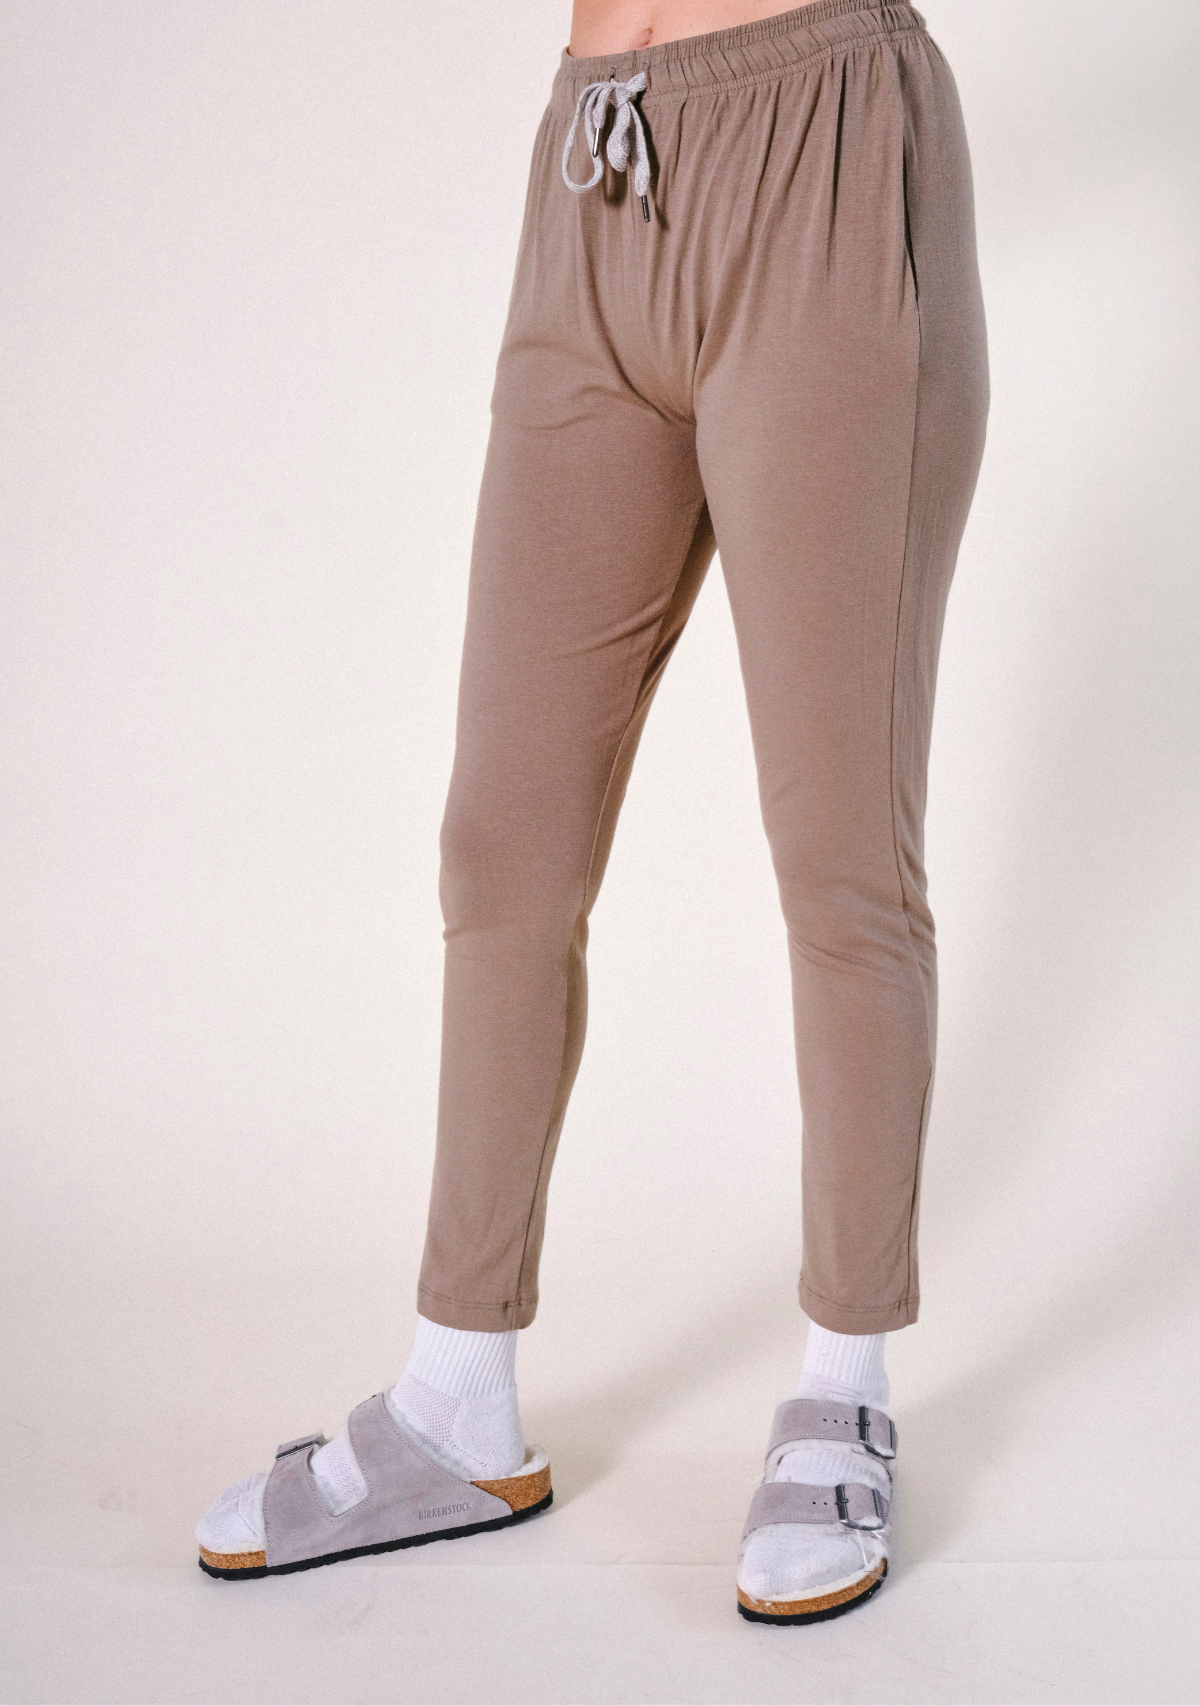 Women's Bamboo Jersey Pajama Pant Tapered color Olive Sizes XS-3X